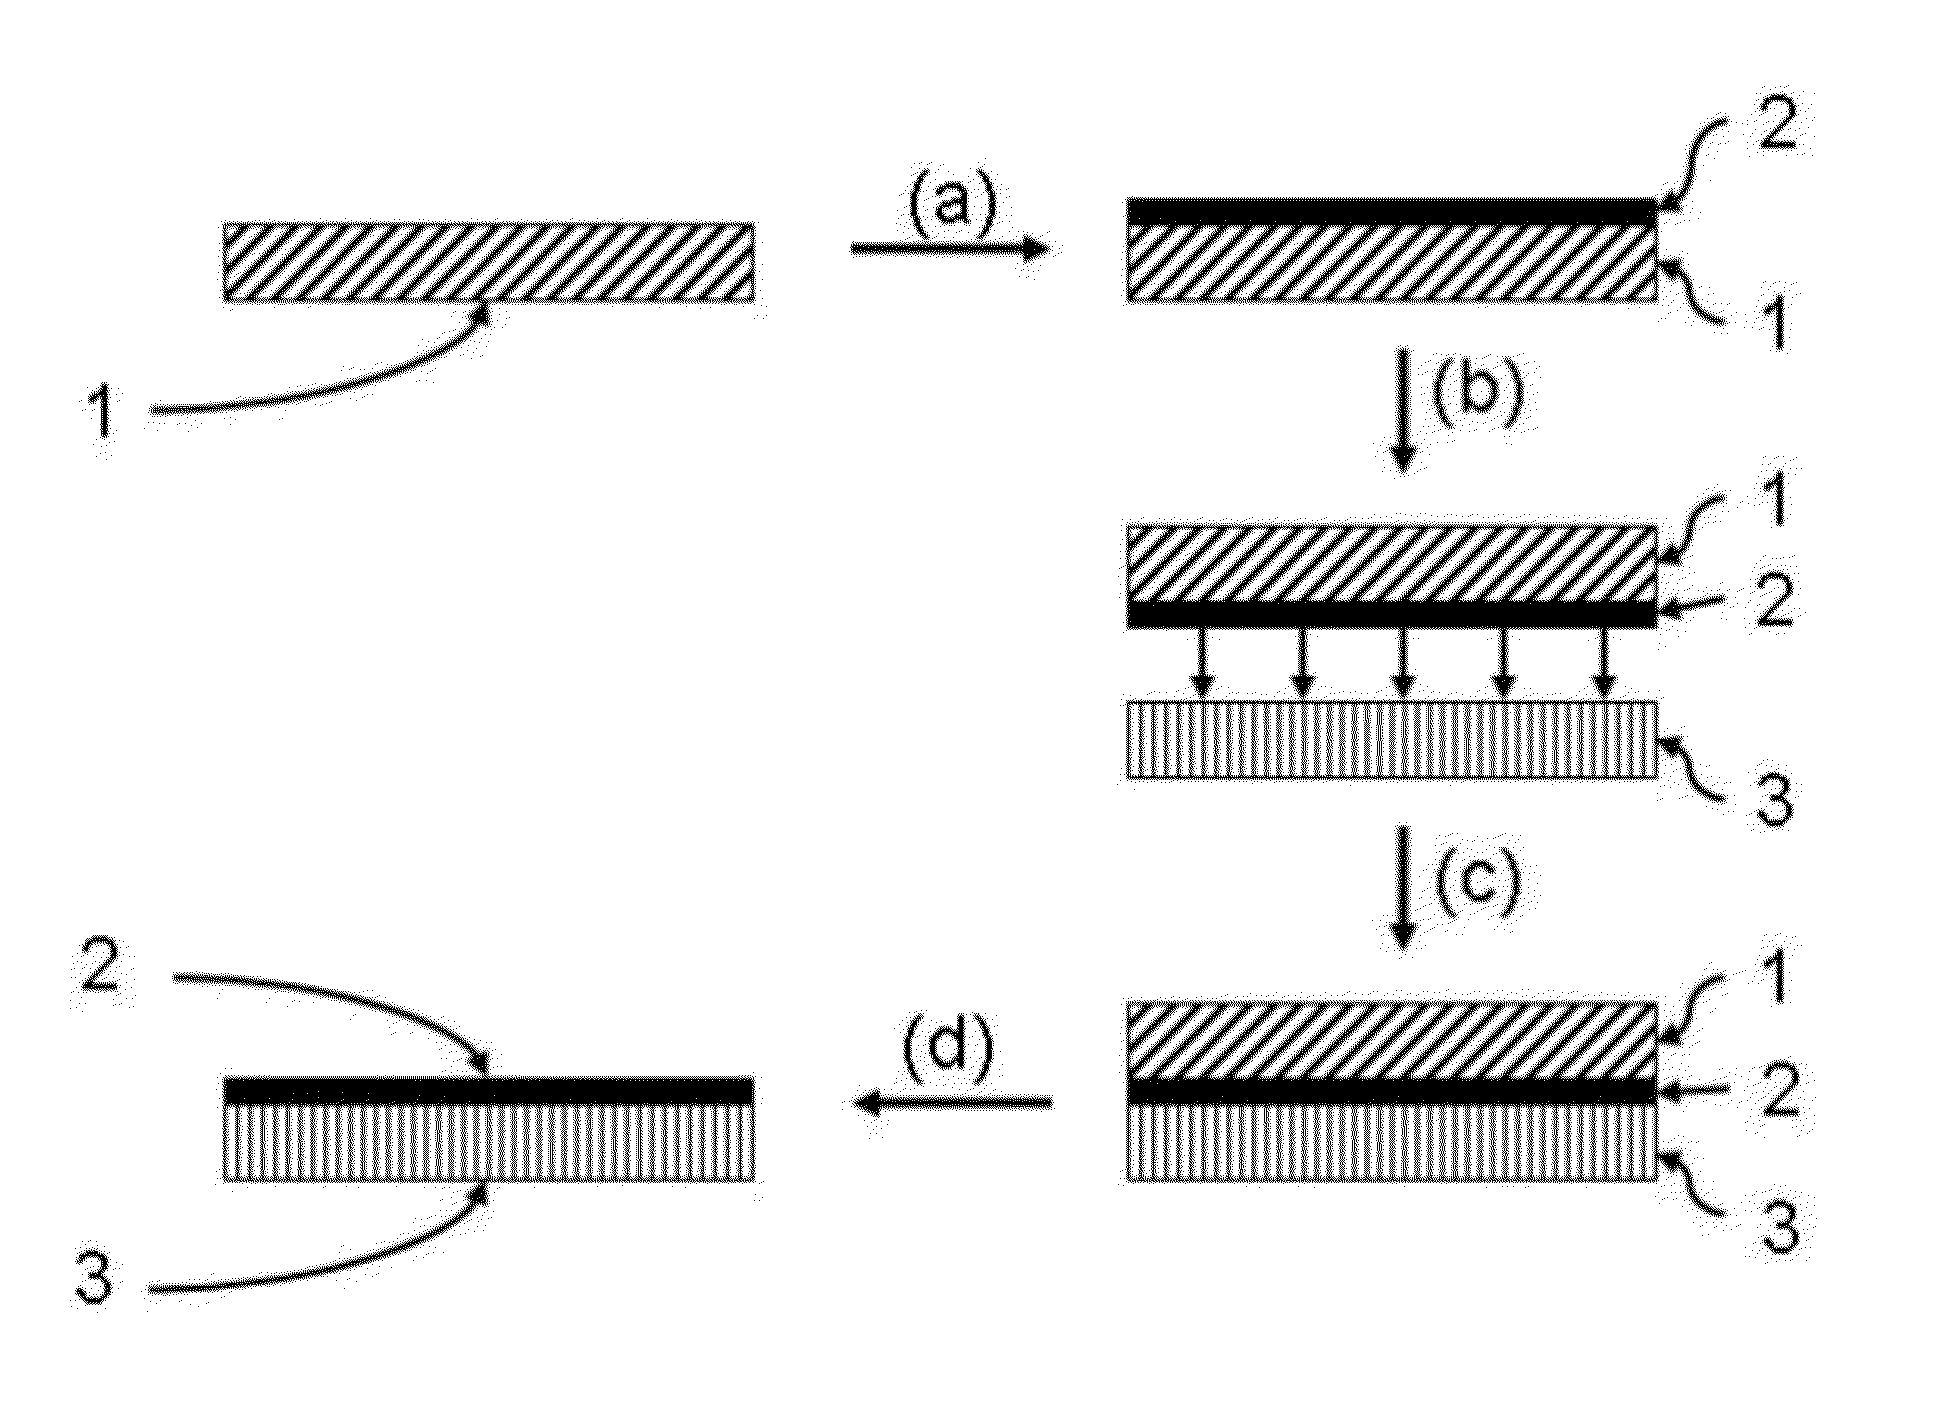 Thin film composite membranes and their method of preparation and use